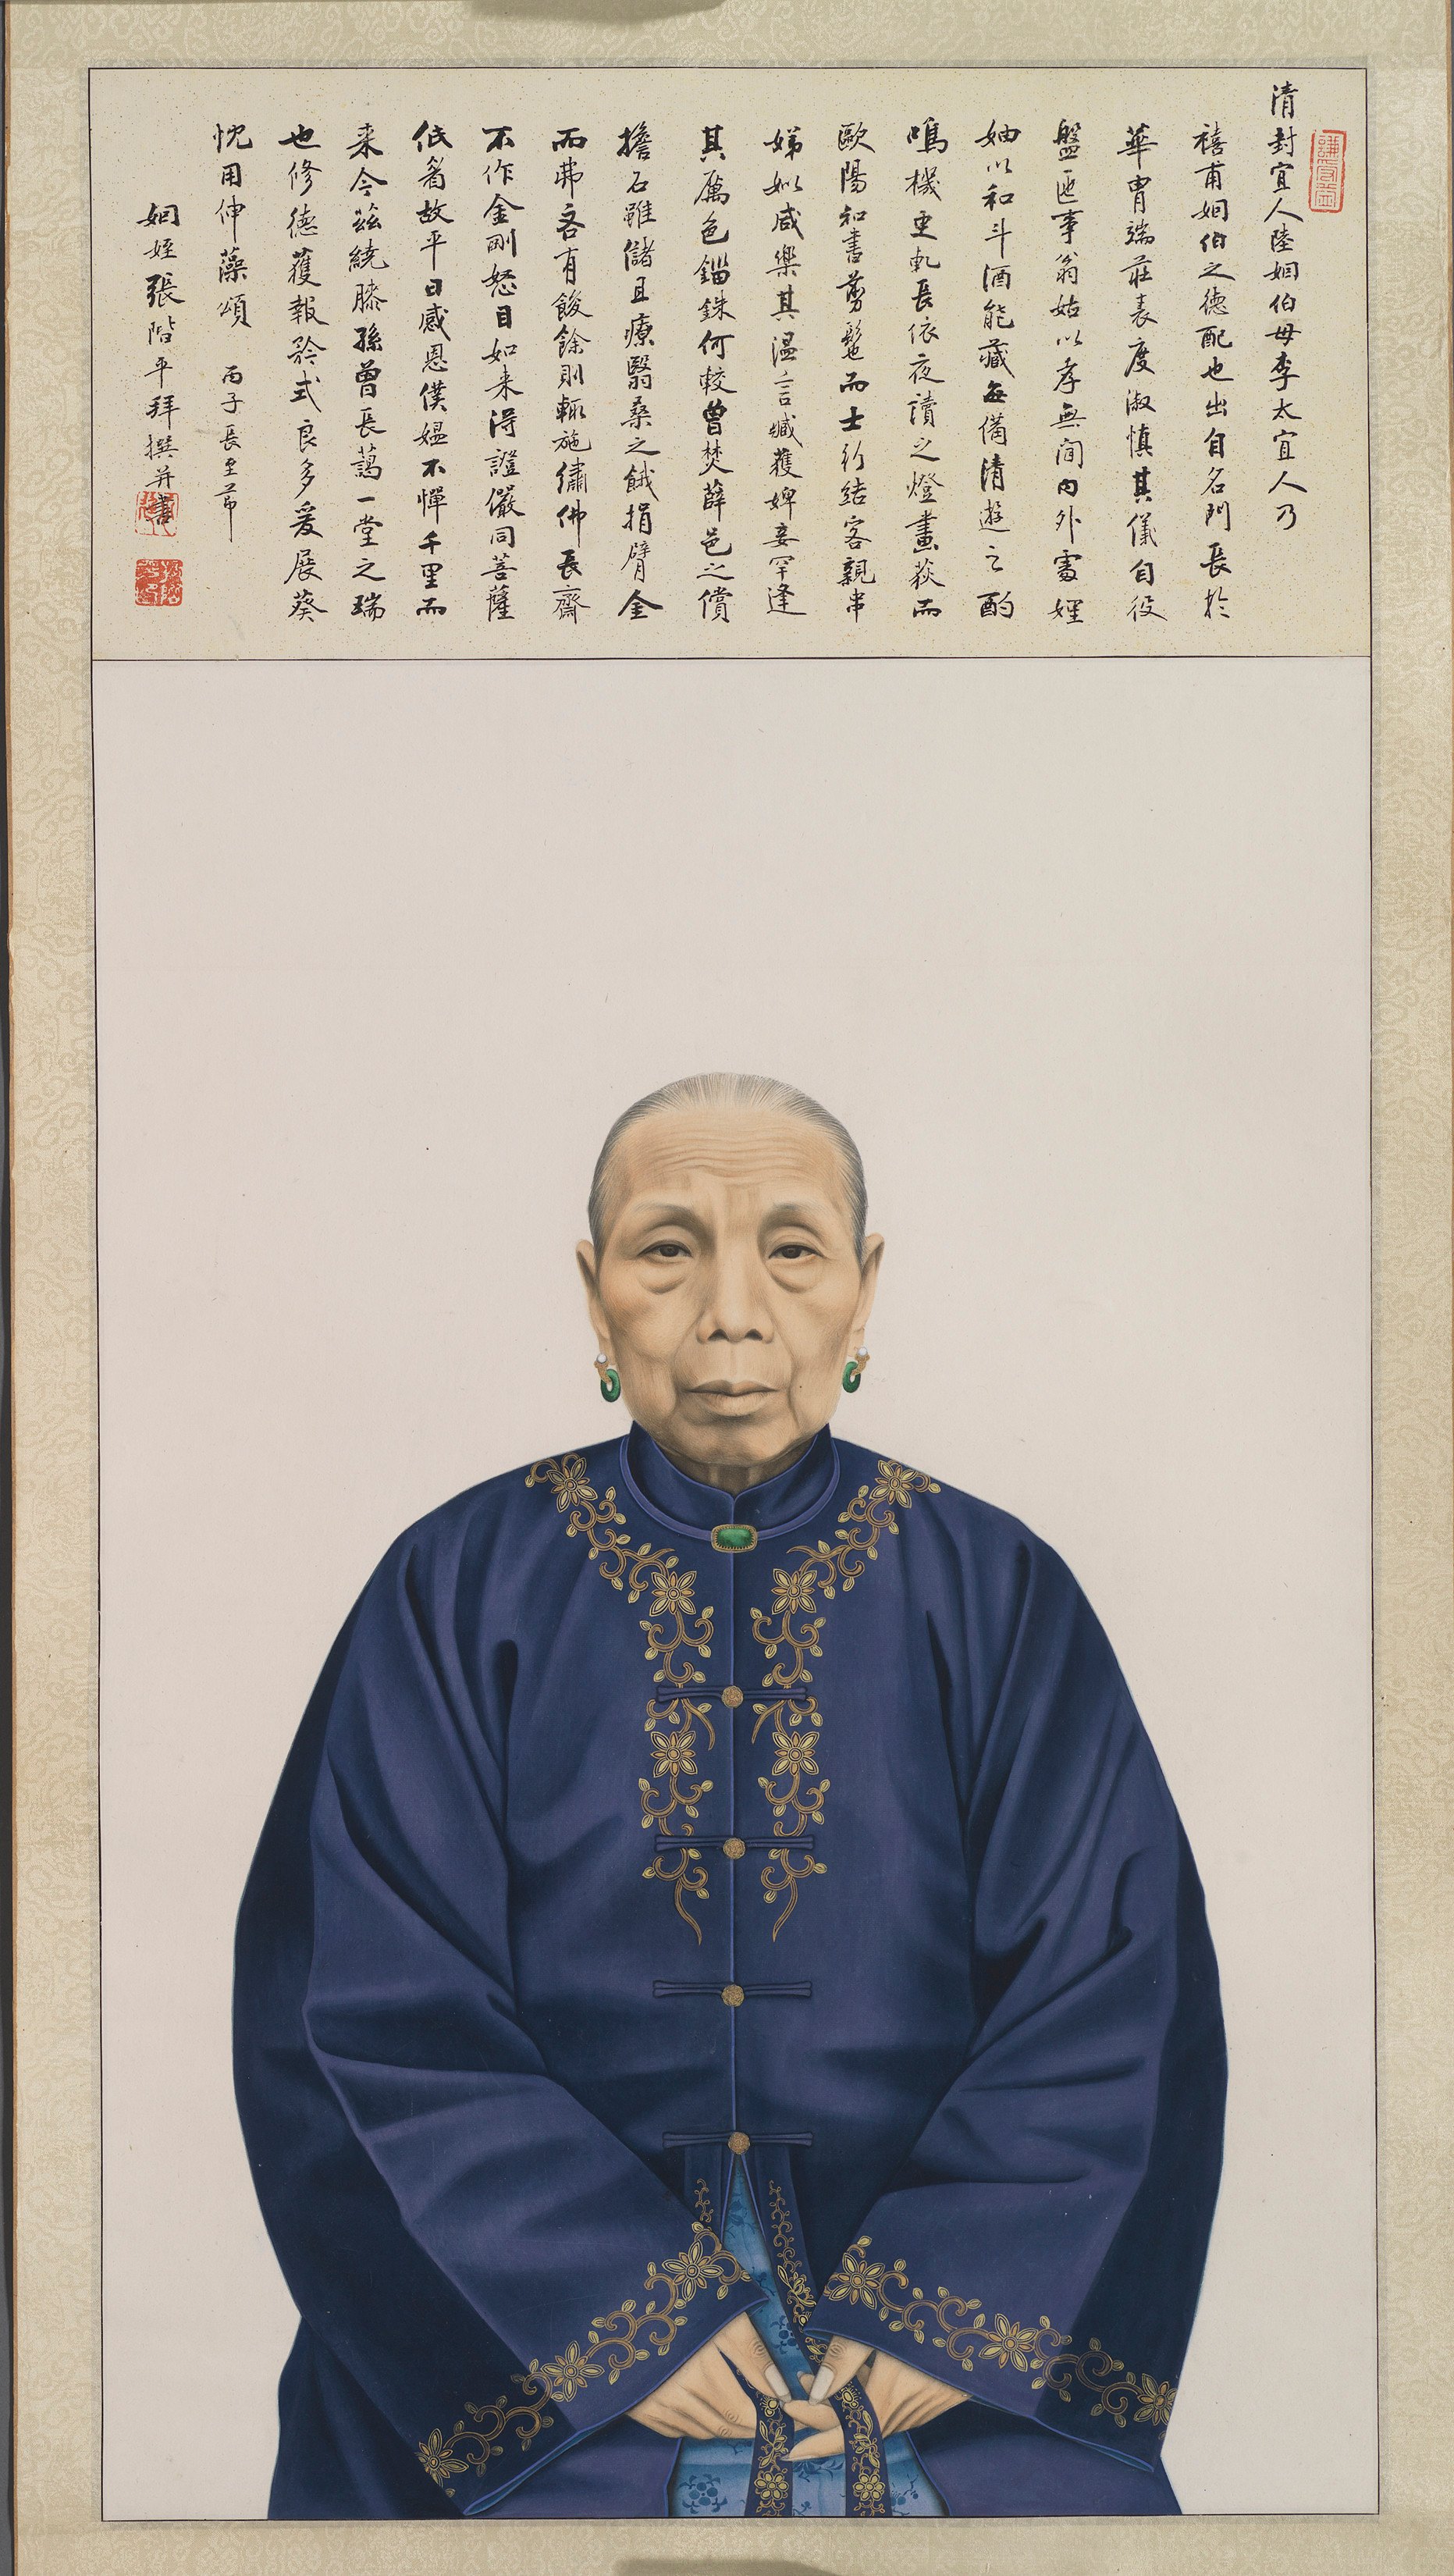 “Portrait of Lady Li”, painted by an unknown artist in ink and colour on paper in China, about 1876, on show in the “China’s Hidden Century” exhibition. Photo: British Museum